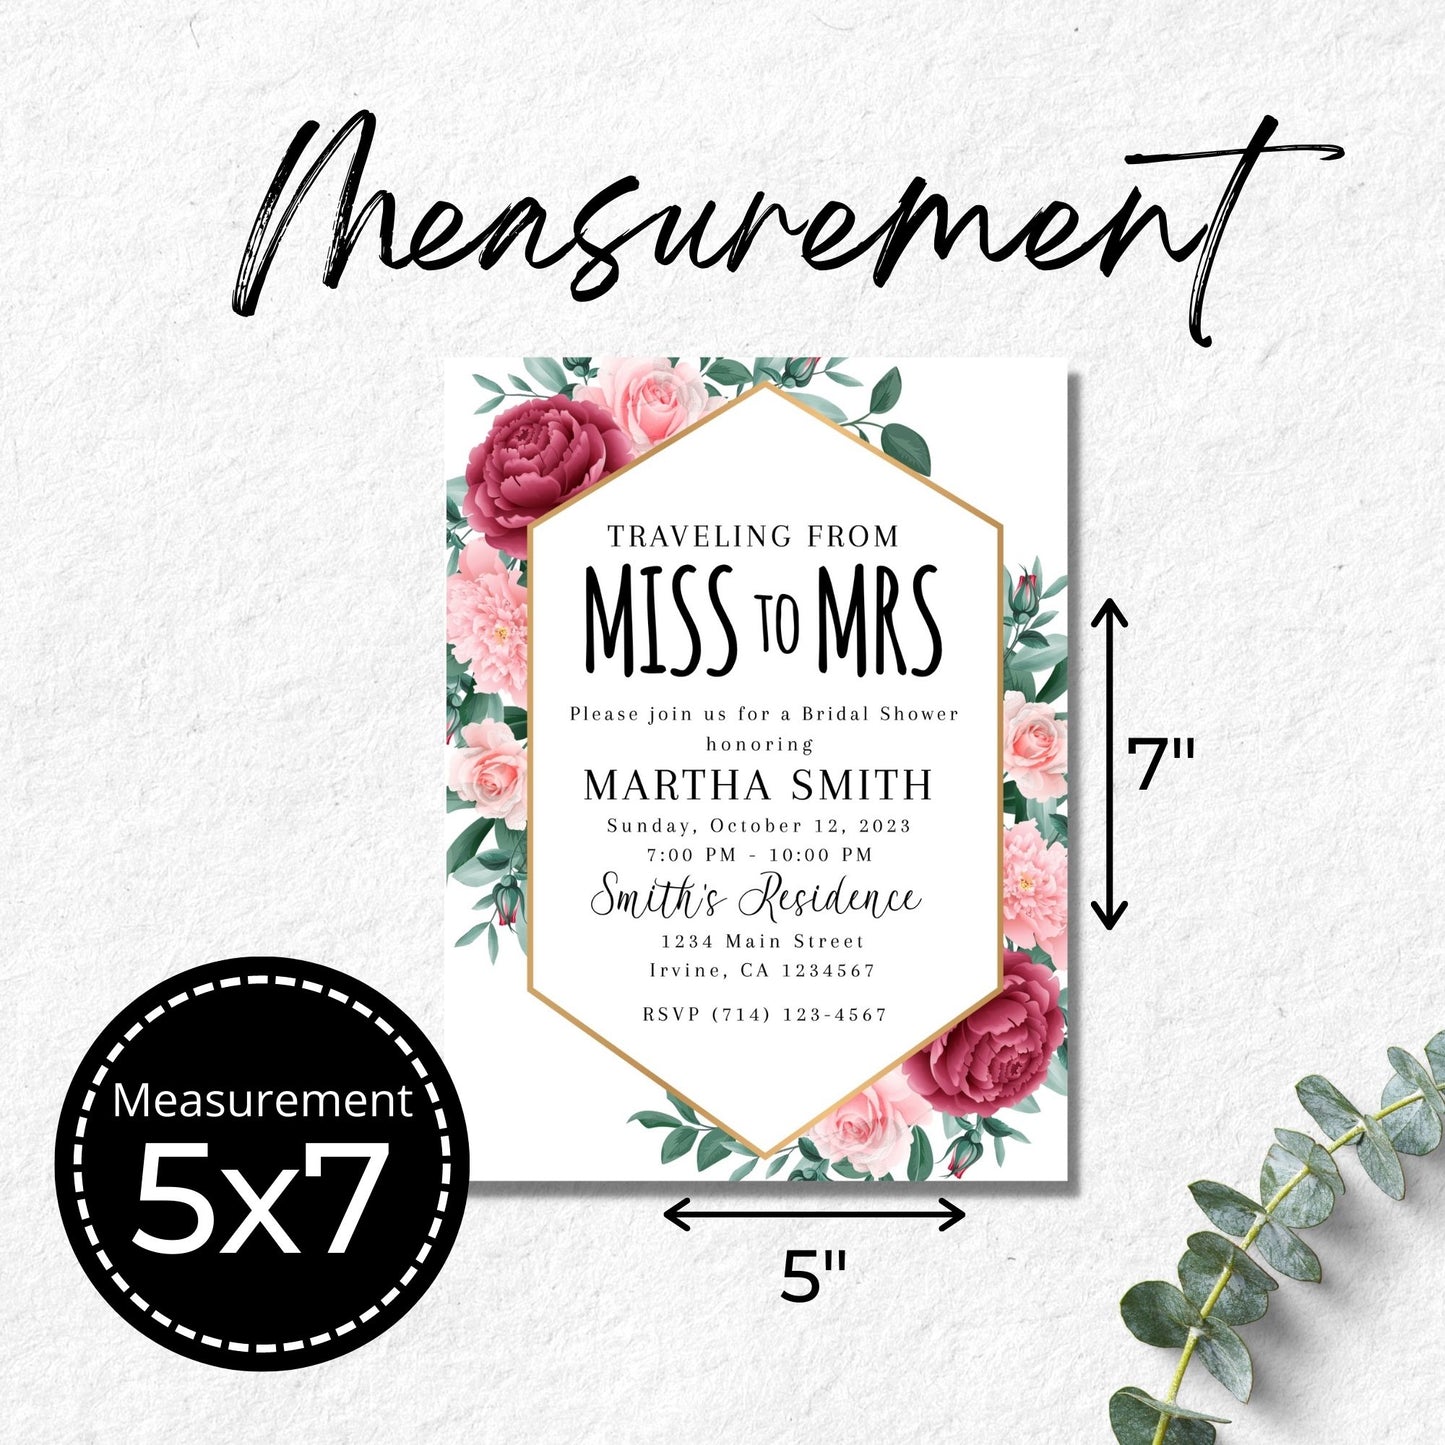 Miss to Mrs Invitation Template - Floral